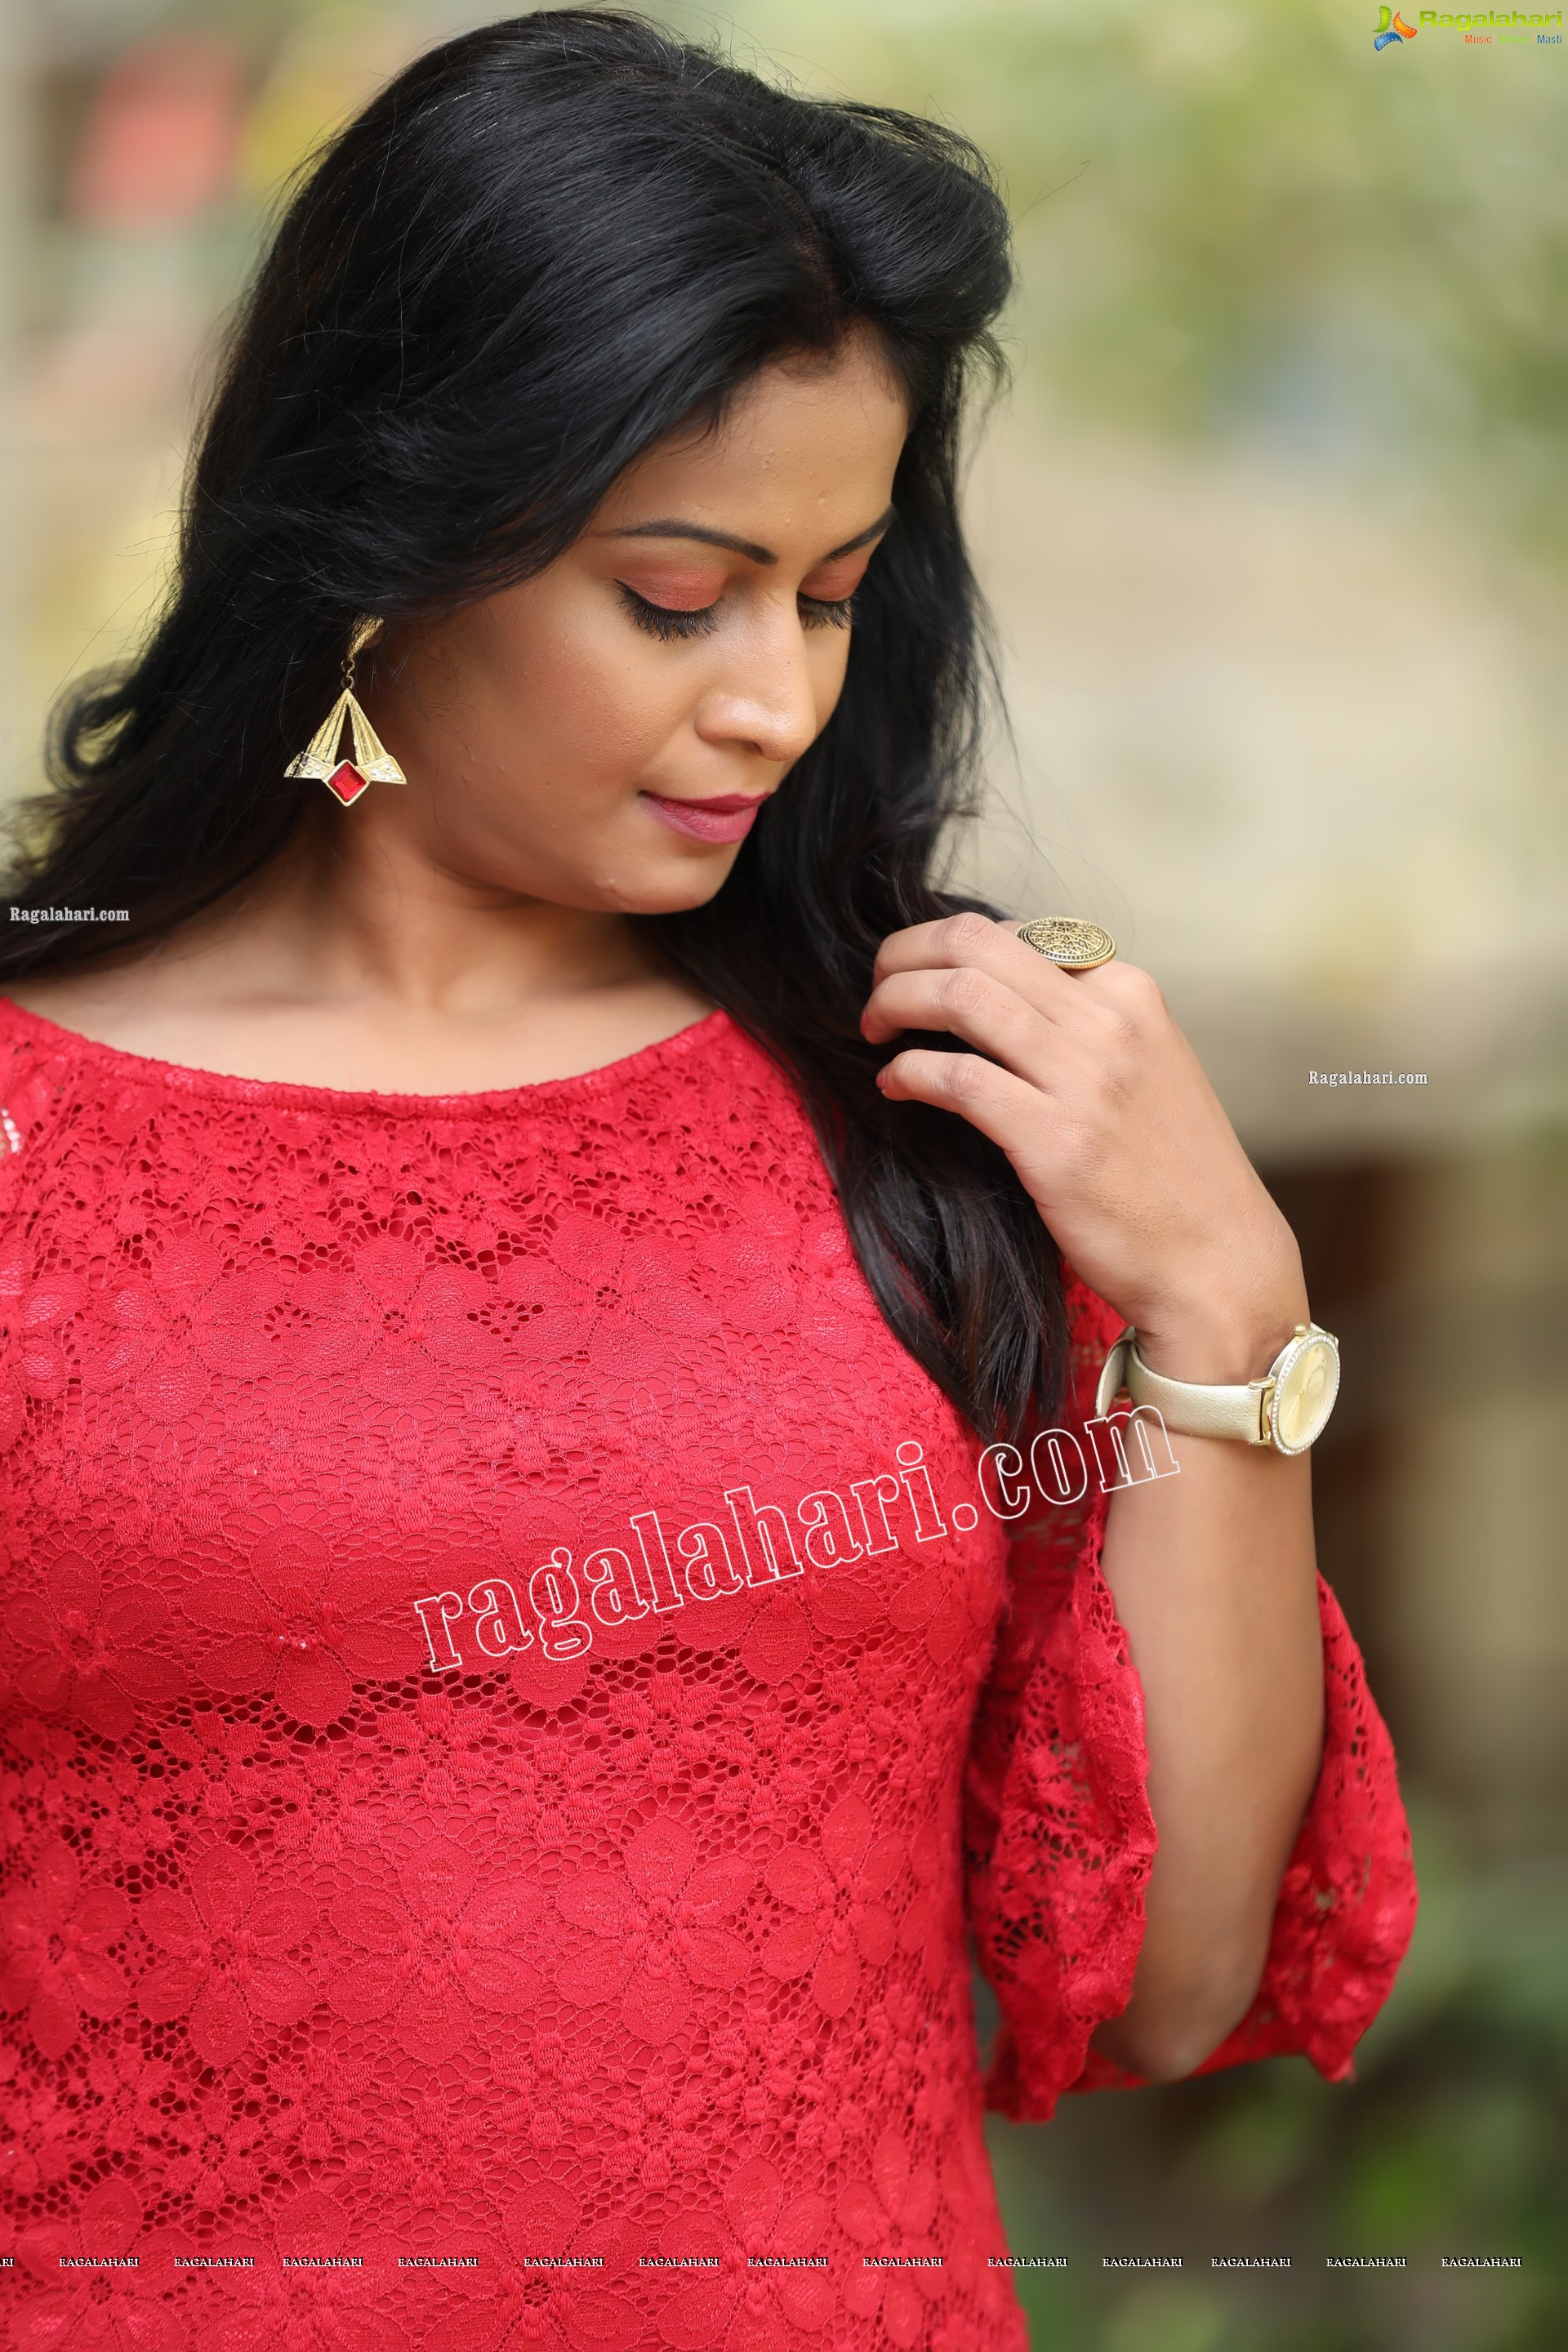 Sawali S Nandaragi in Red Lace Dress Exclusive Photo Shoot